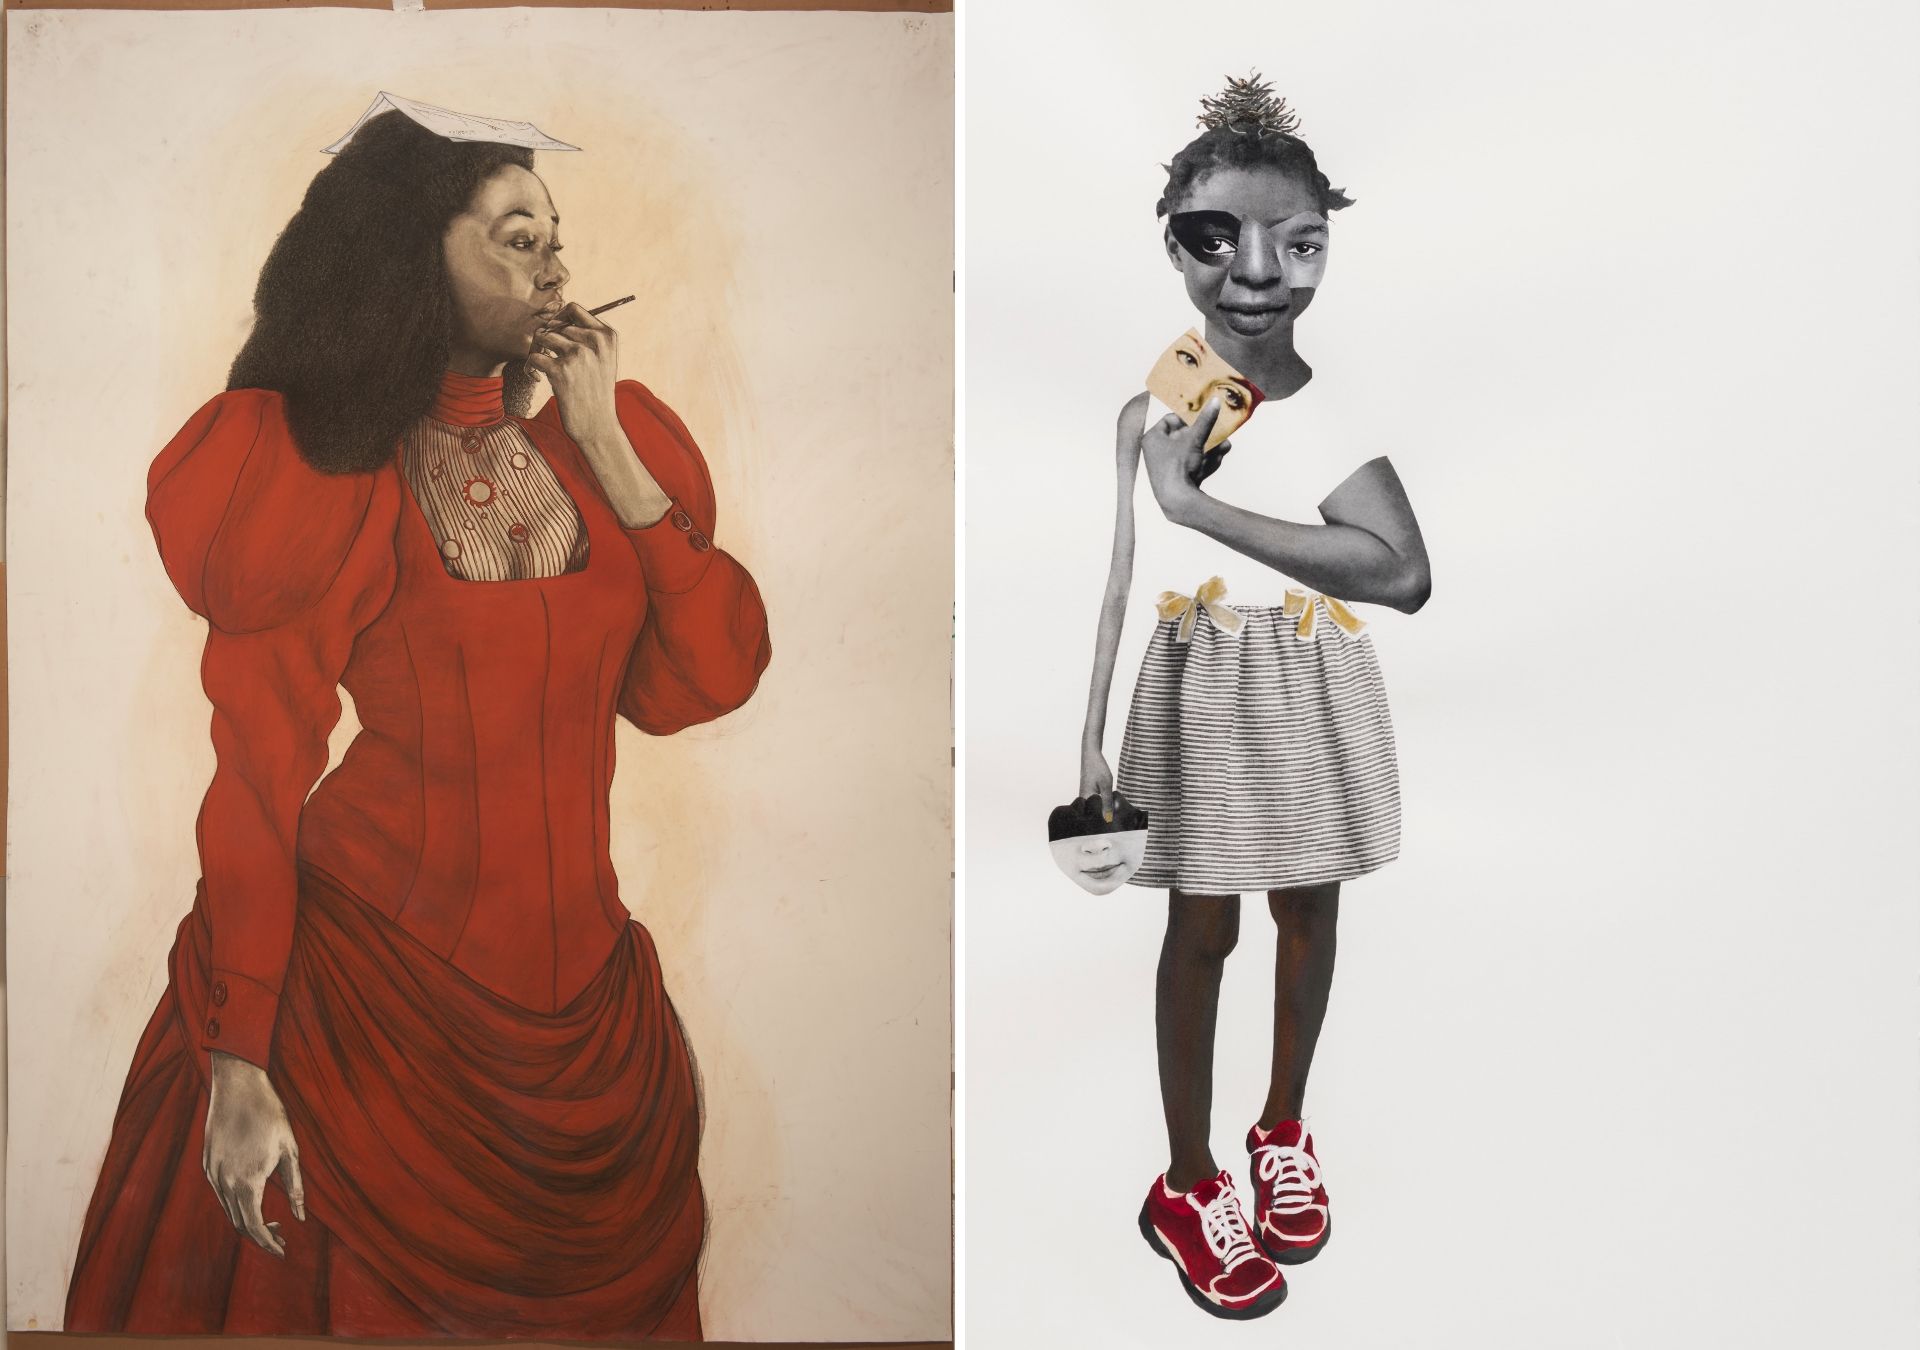 Two different artworks: A woman smoking a cigarette and wearing a red dress; and a collage of a young girl holding masks